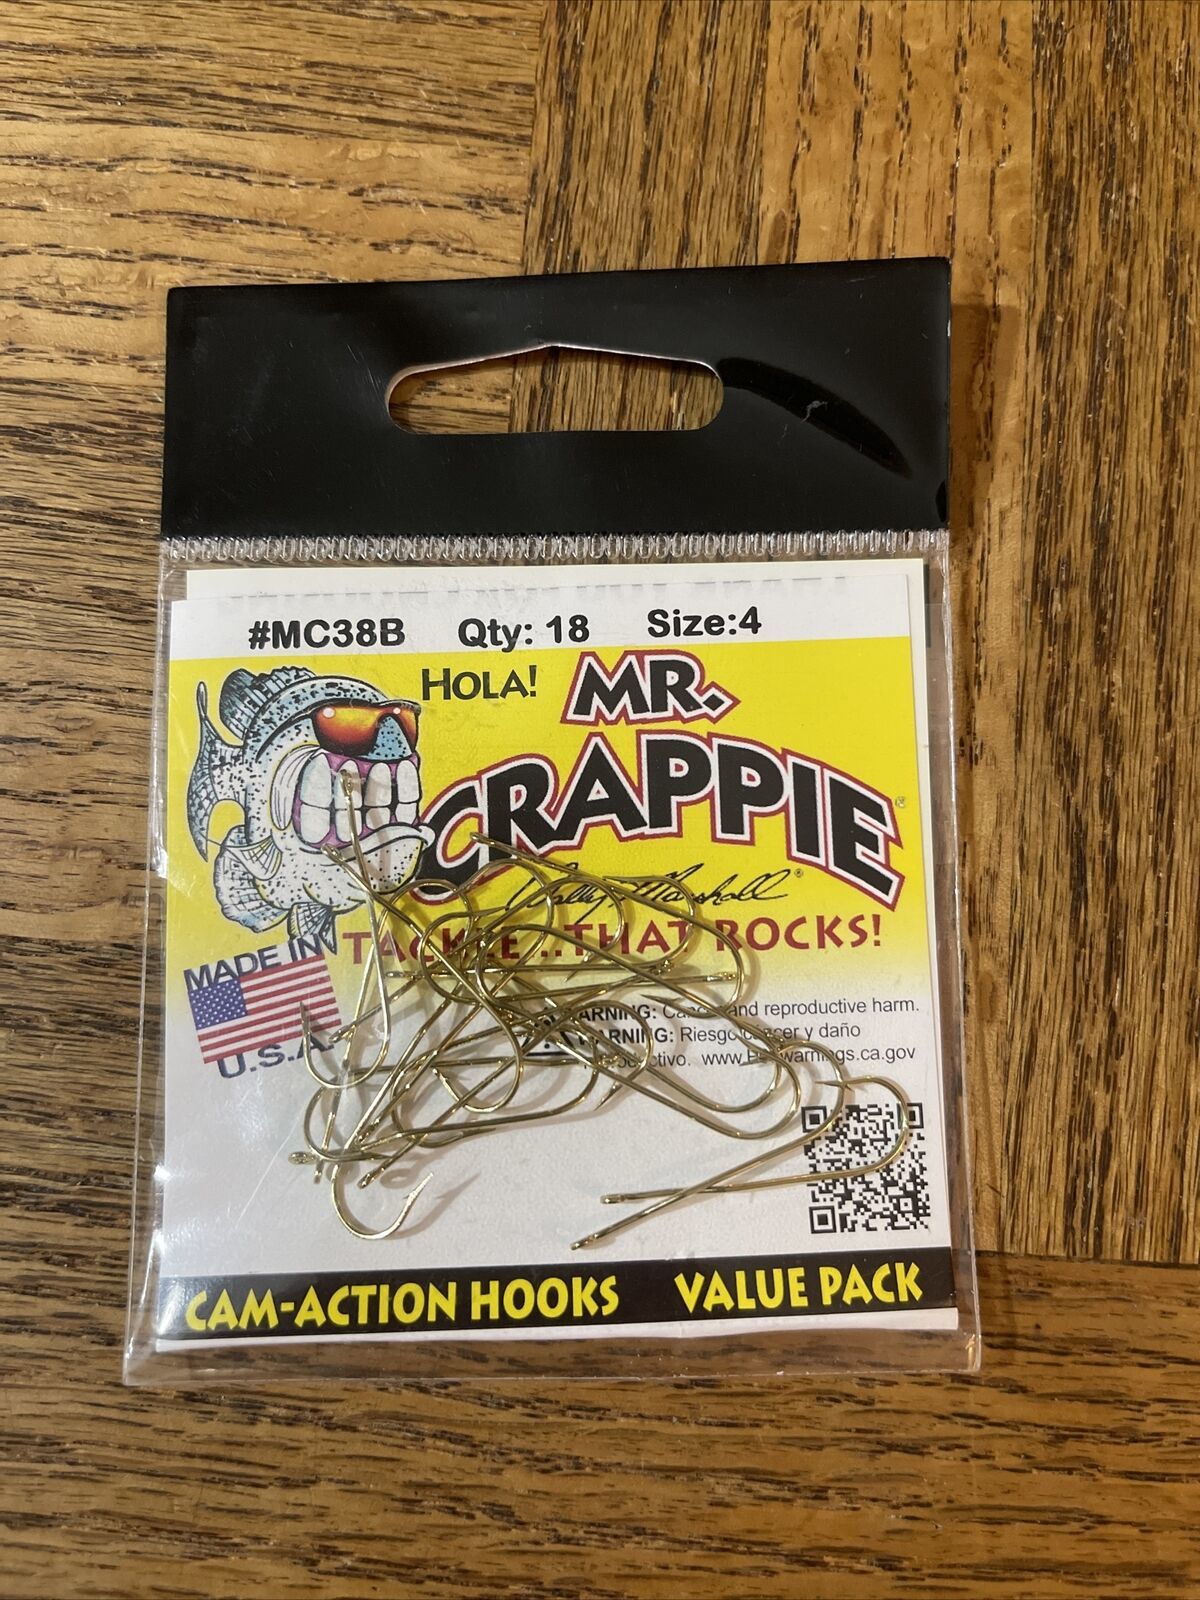 Primary image for Mr. Crappie Cam Action Hook Size 4